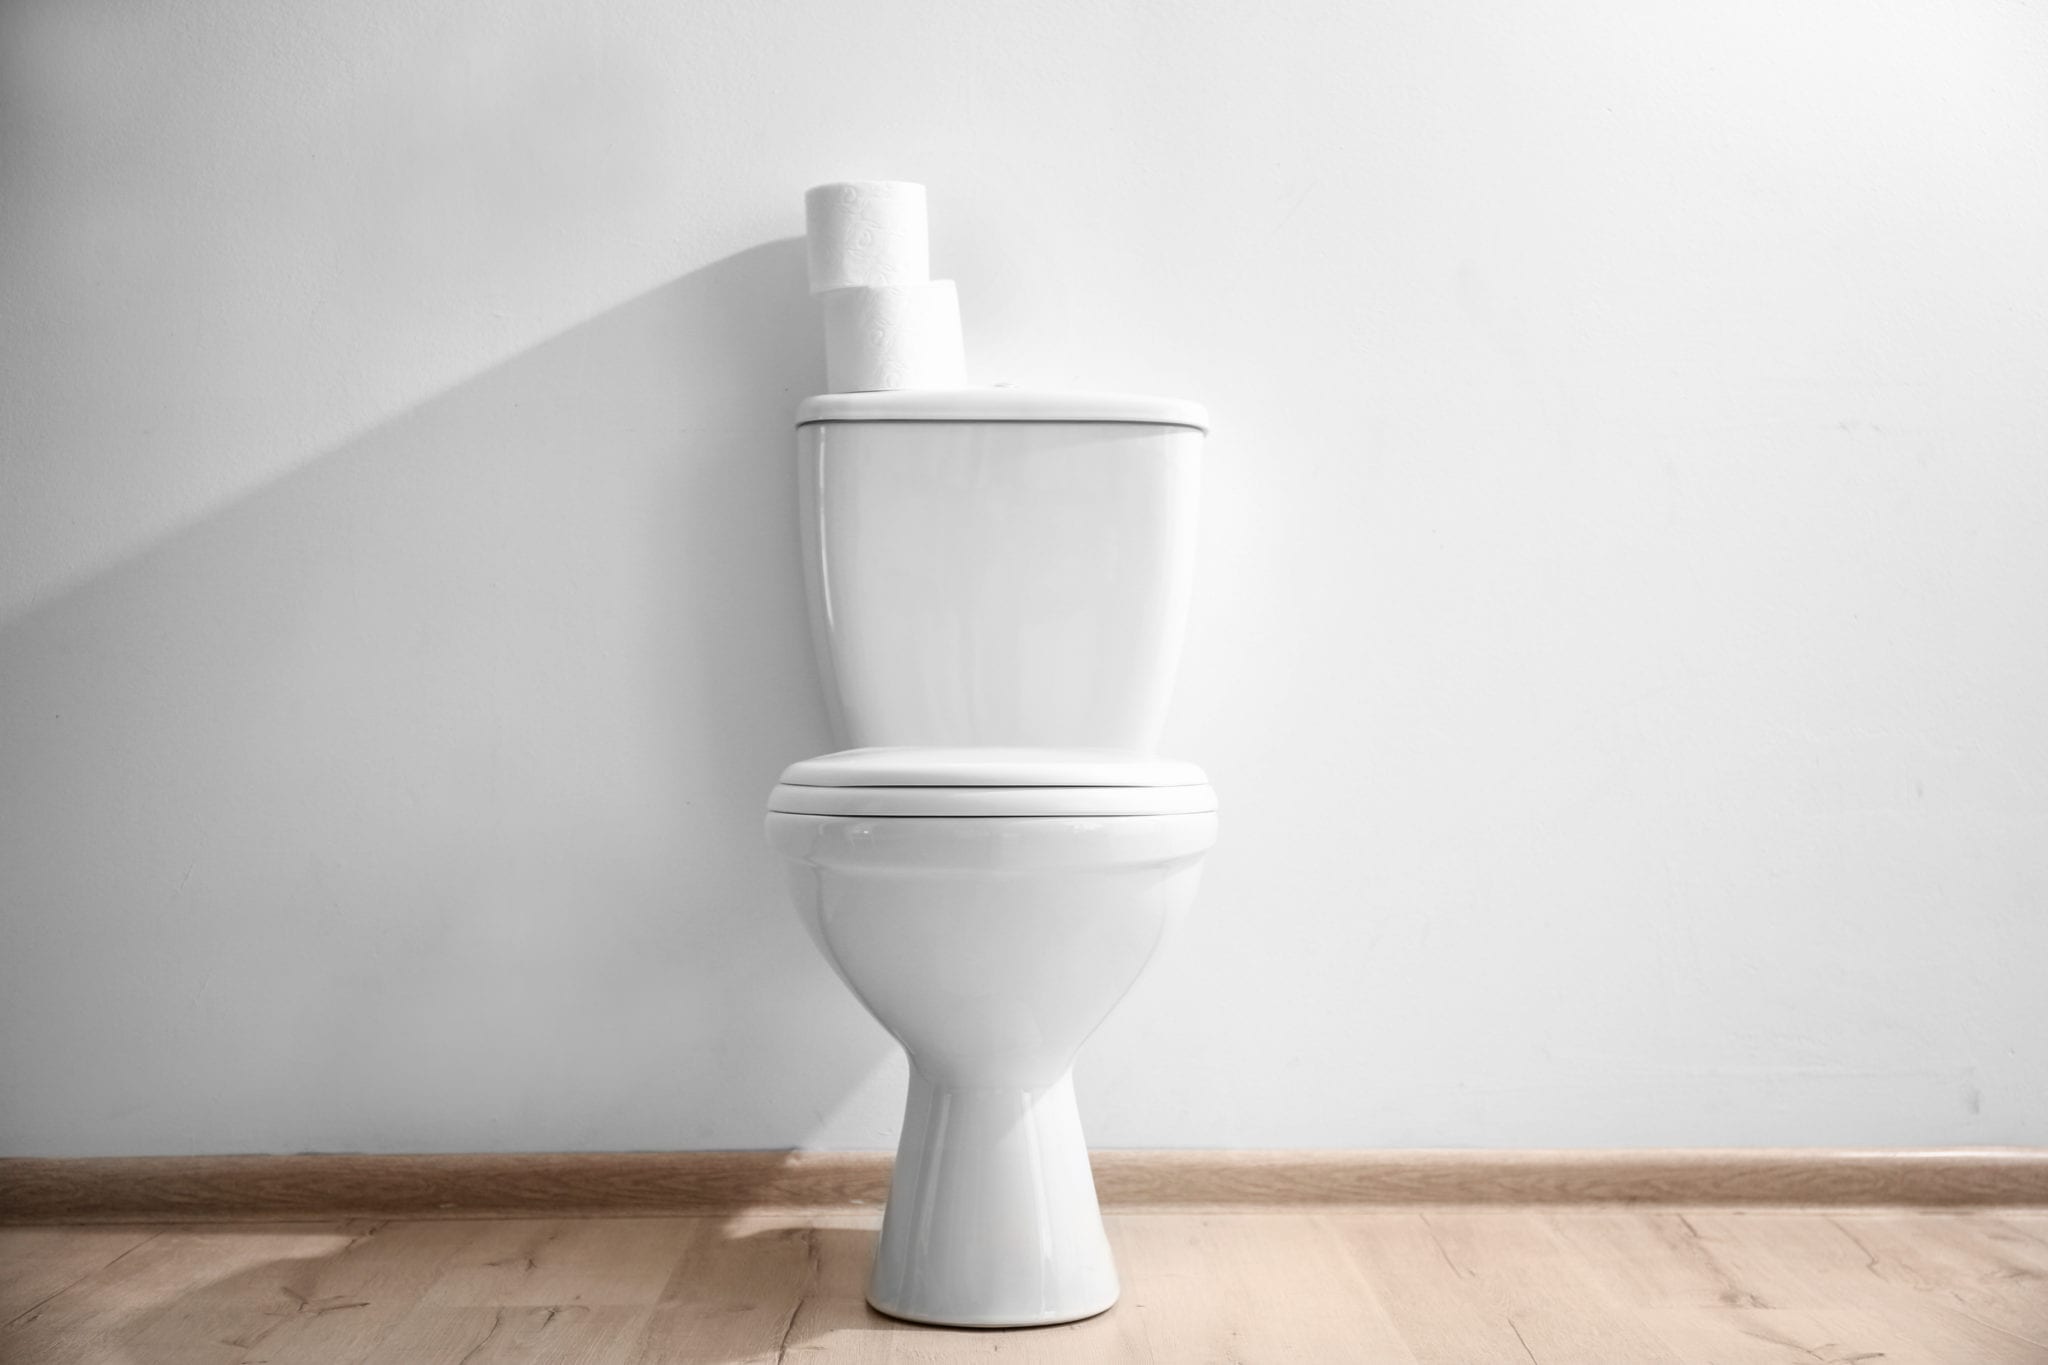 Why Is My Toilet Making A Hissing Sound?